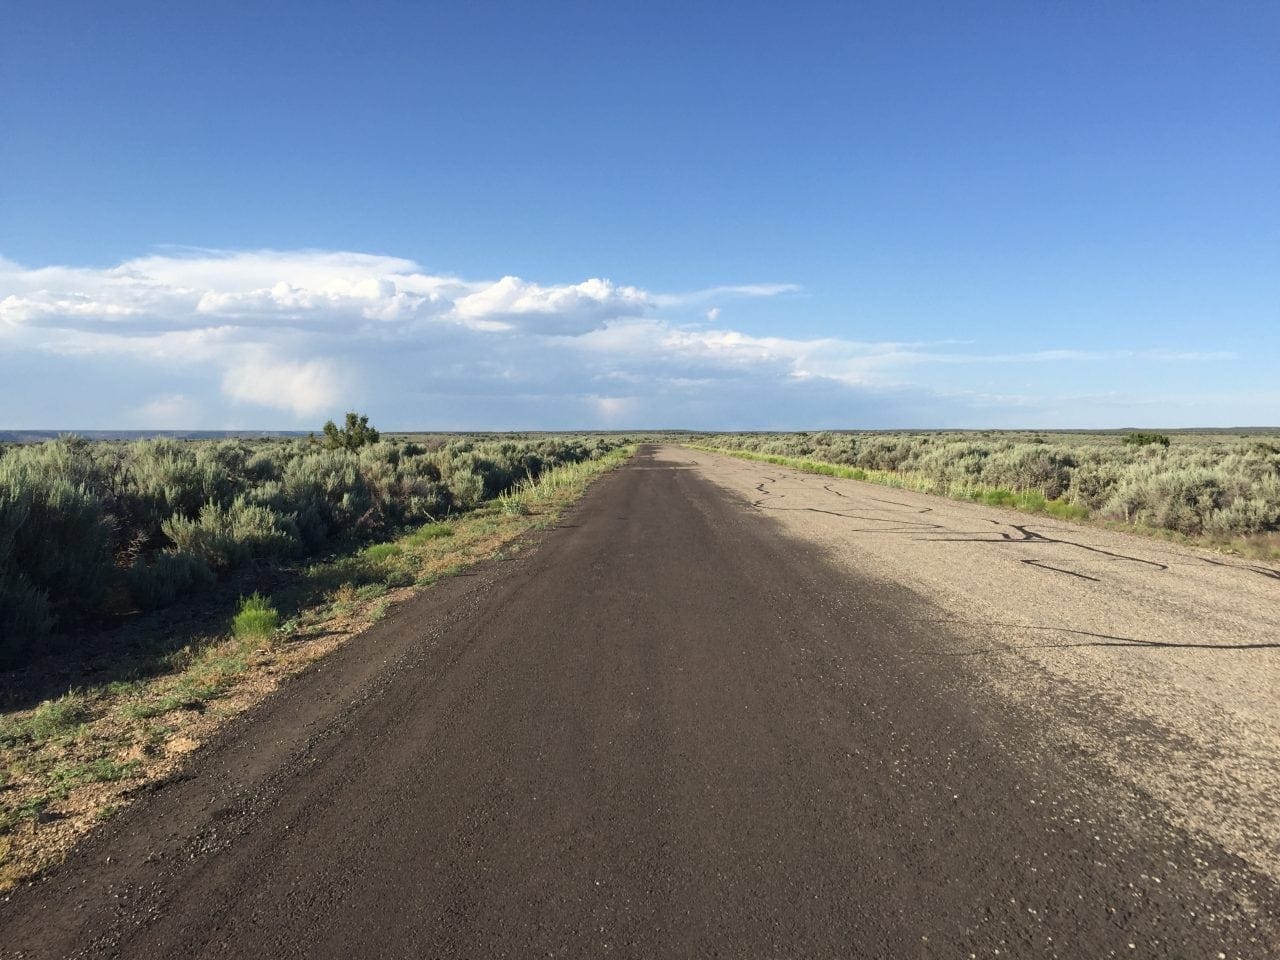 A desolate road leading to Hovenweep National Monument